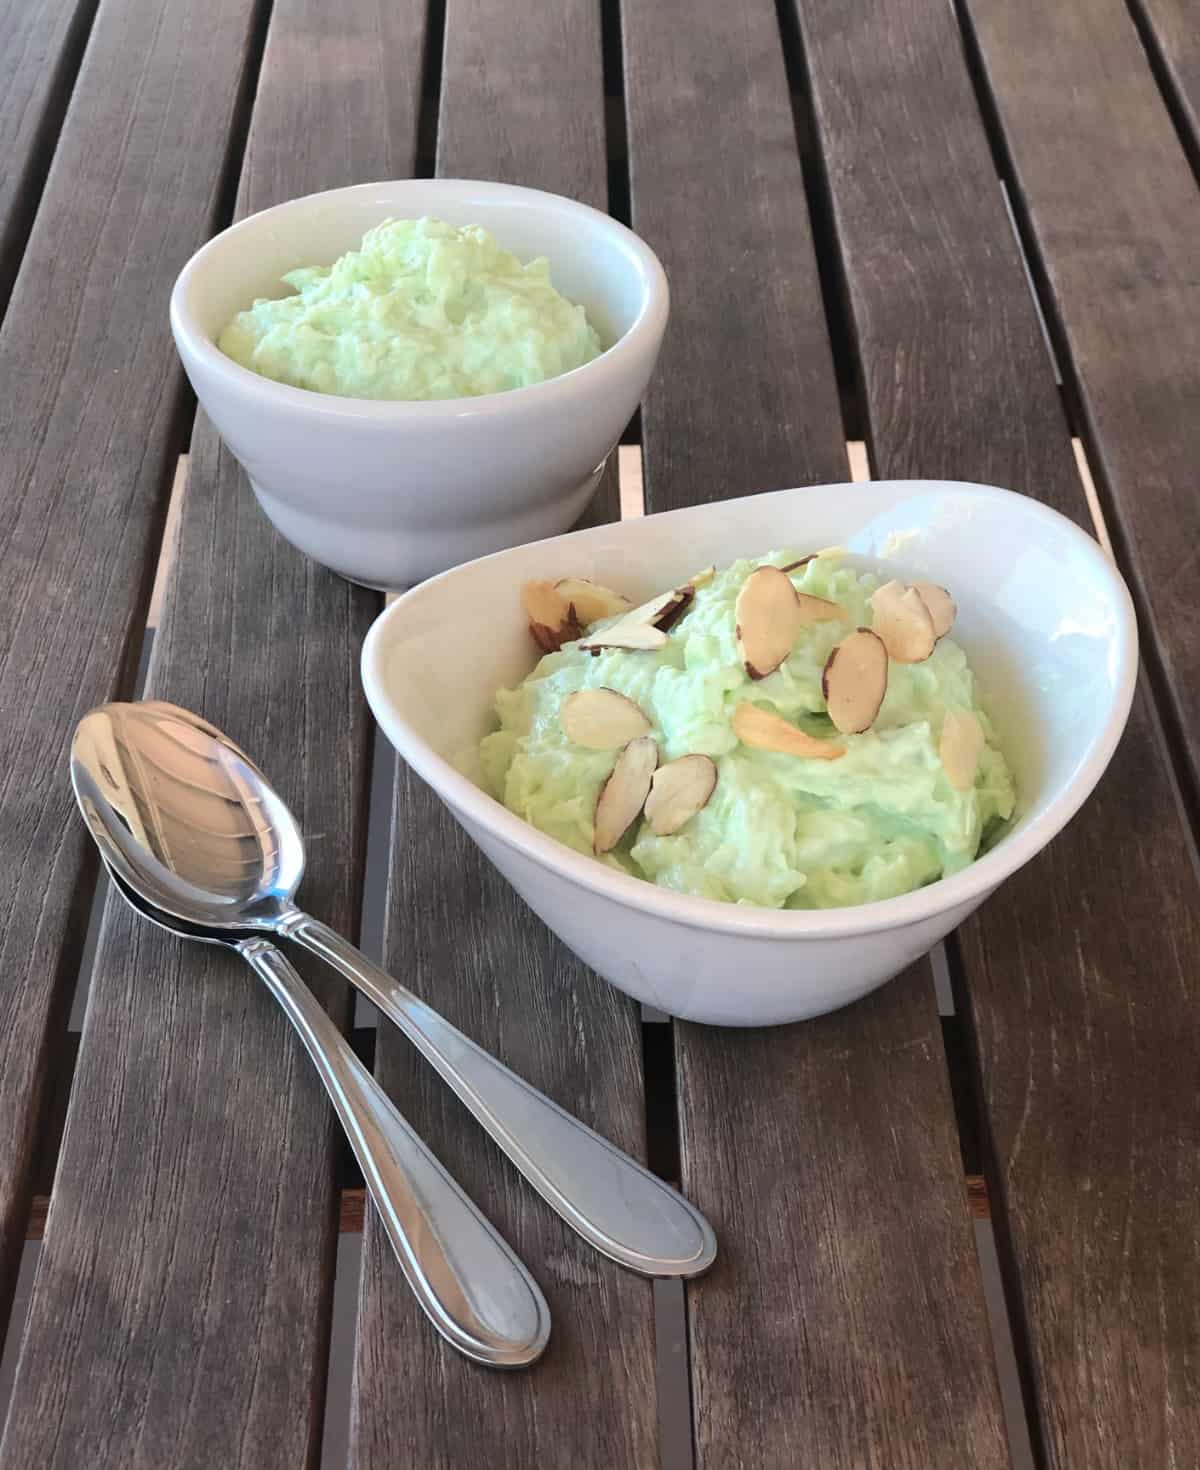 Two small white bowls with Watergate salad, one topped with sliced almonds one without, next to two spoons.